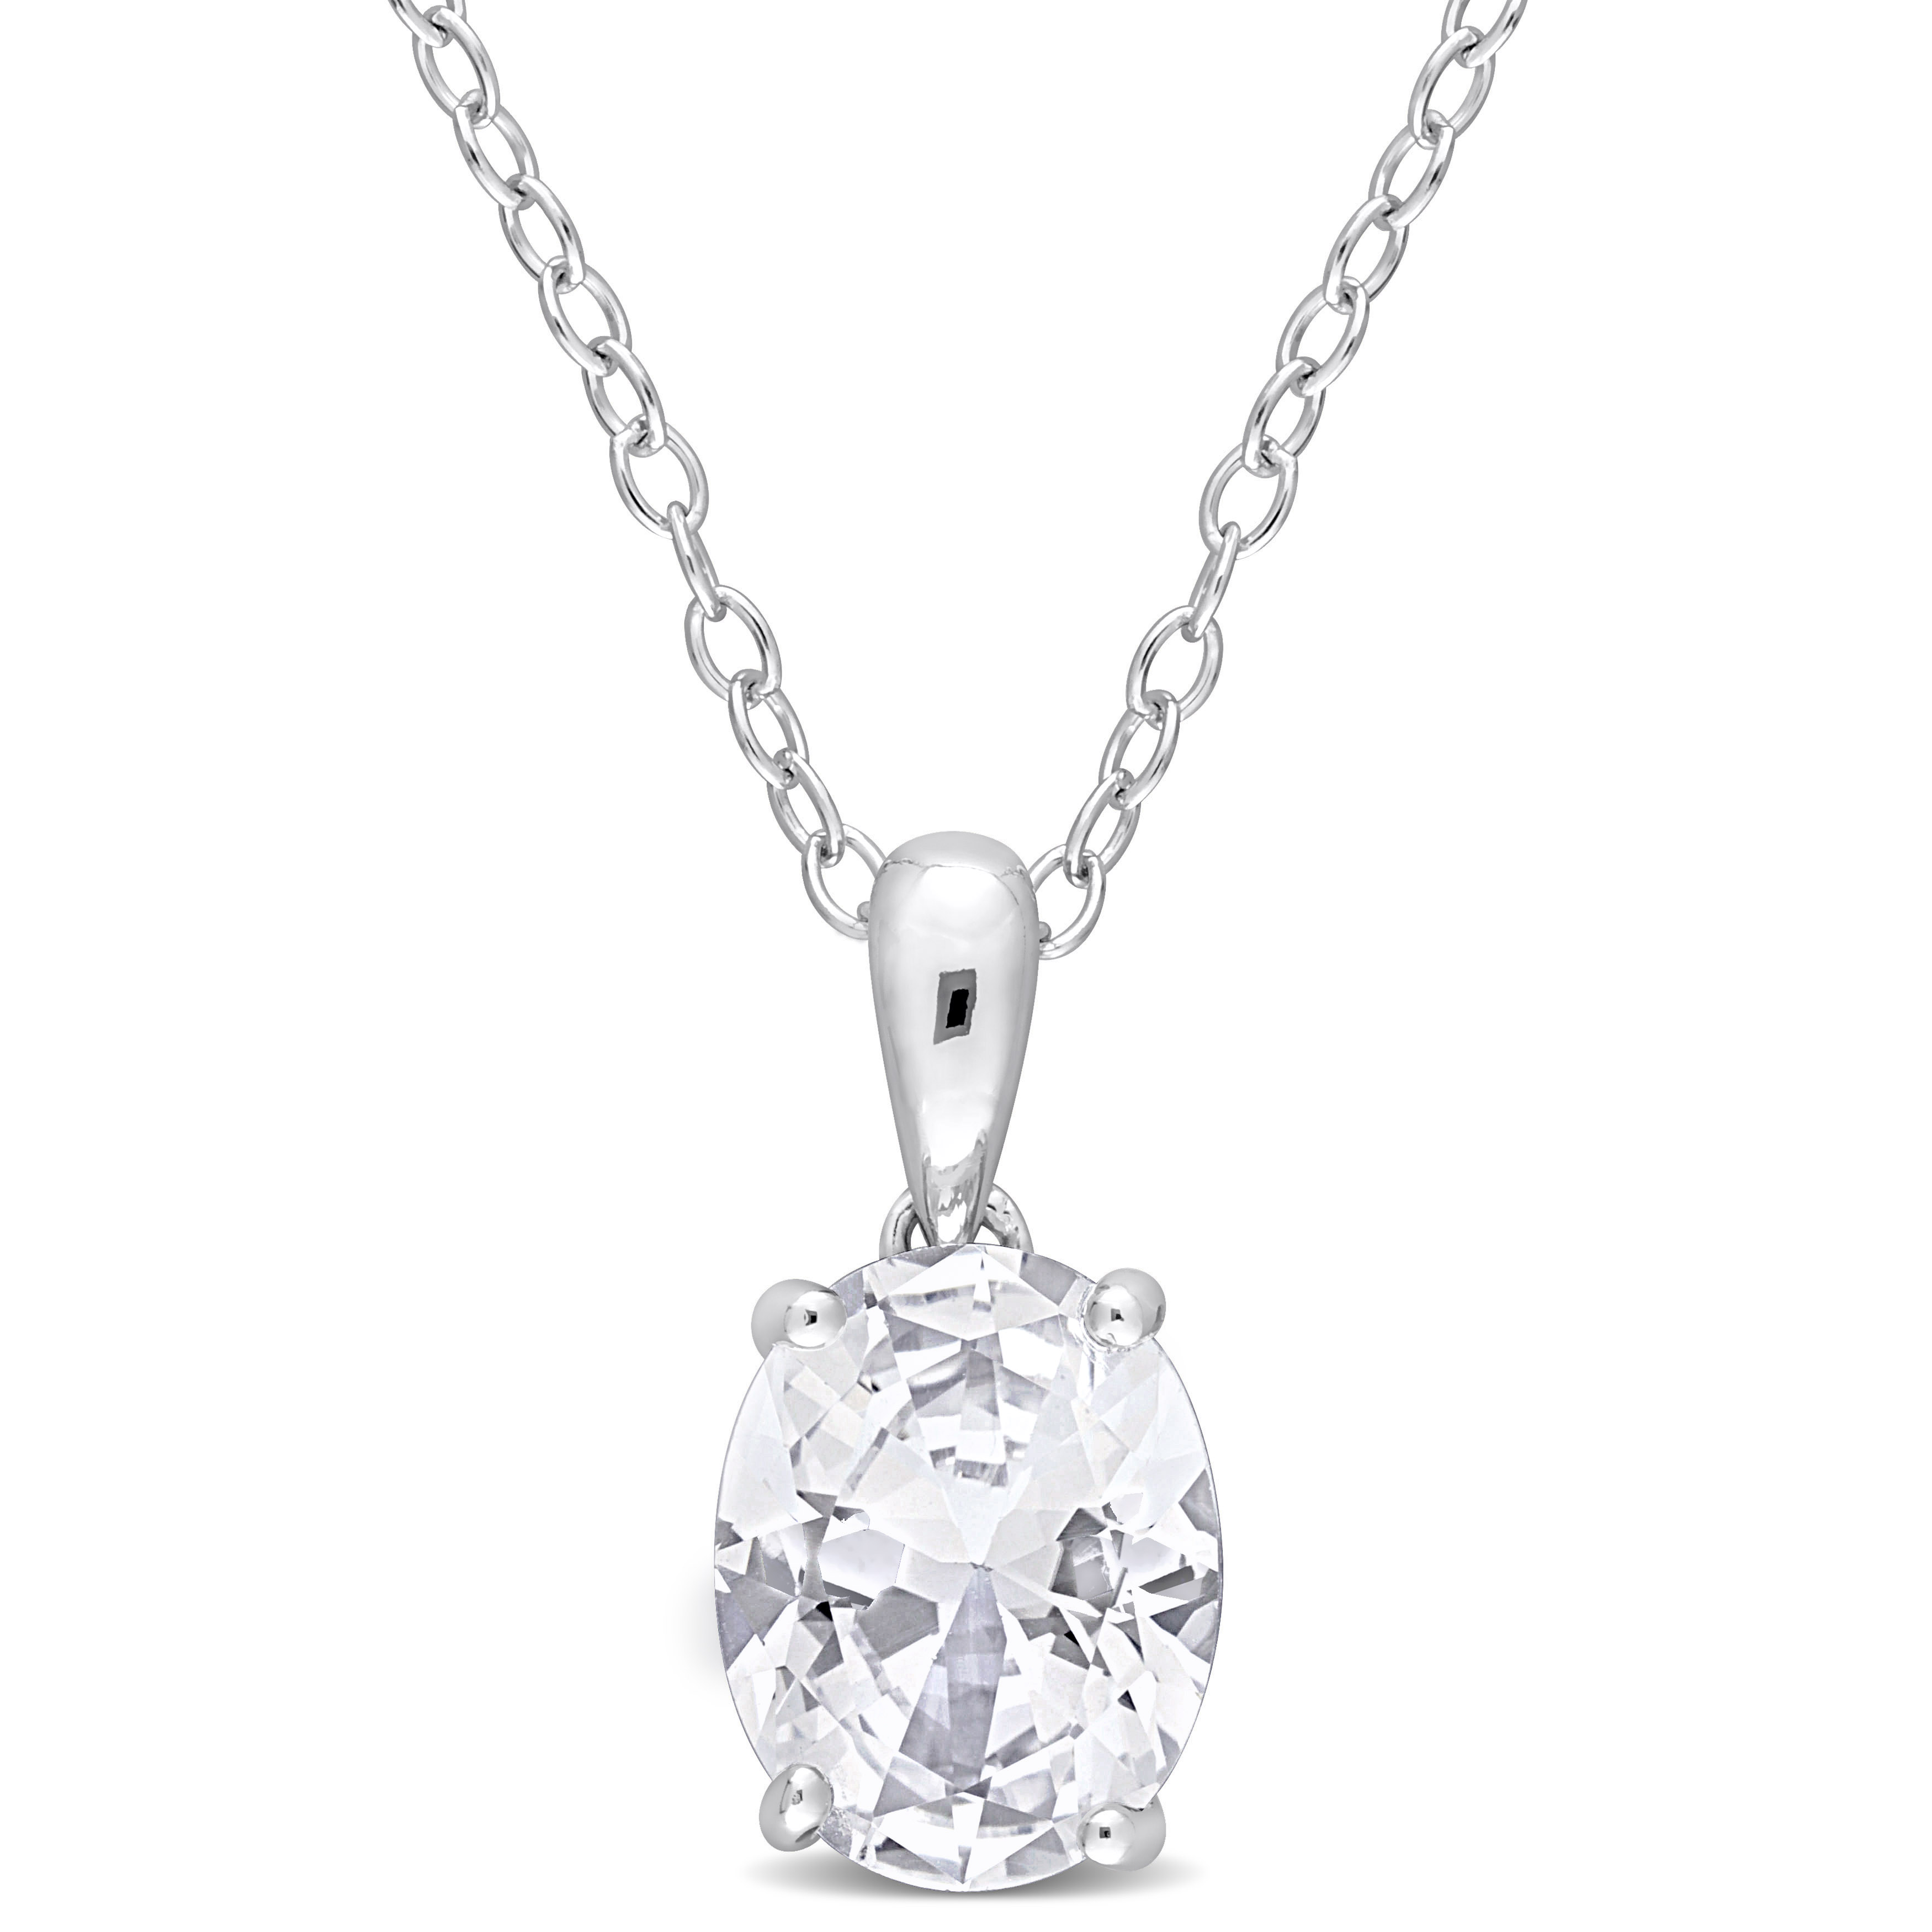 3 CT TGW Oval Created White Sapphire Solitaire Heart Design Pendant with Chain in Sterling Silver - 18 in.